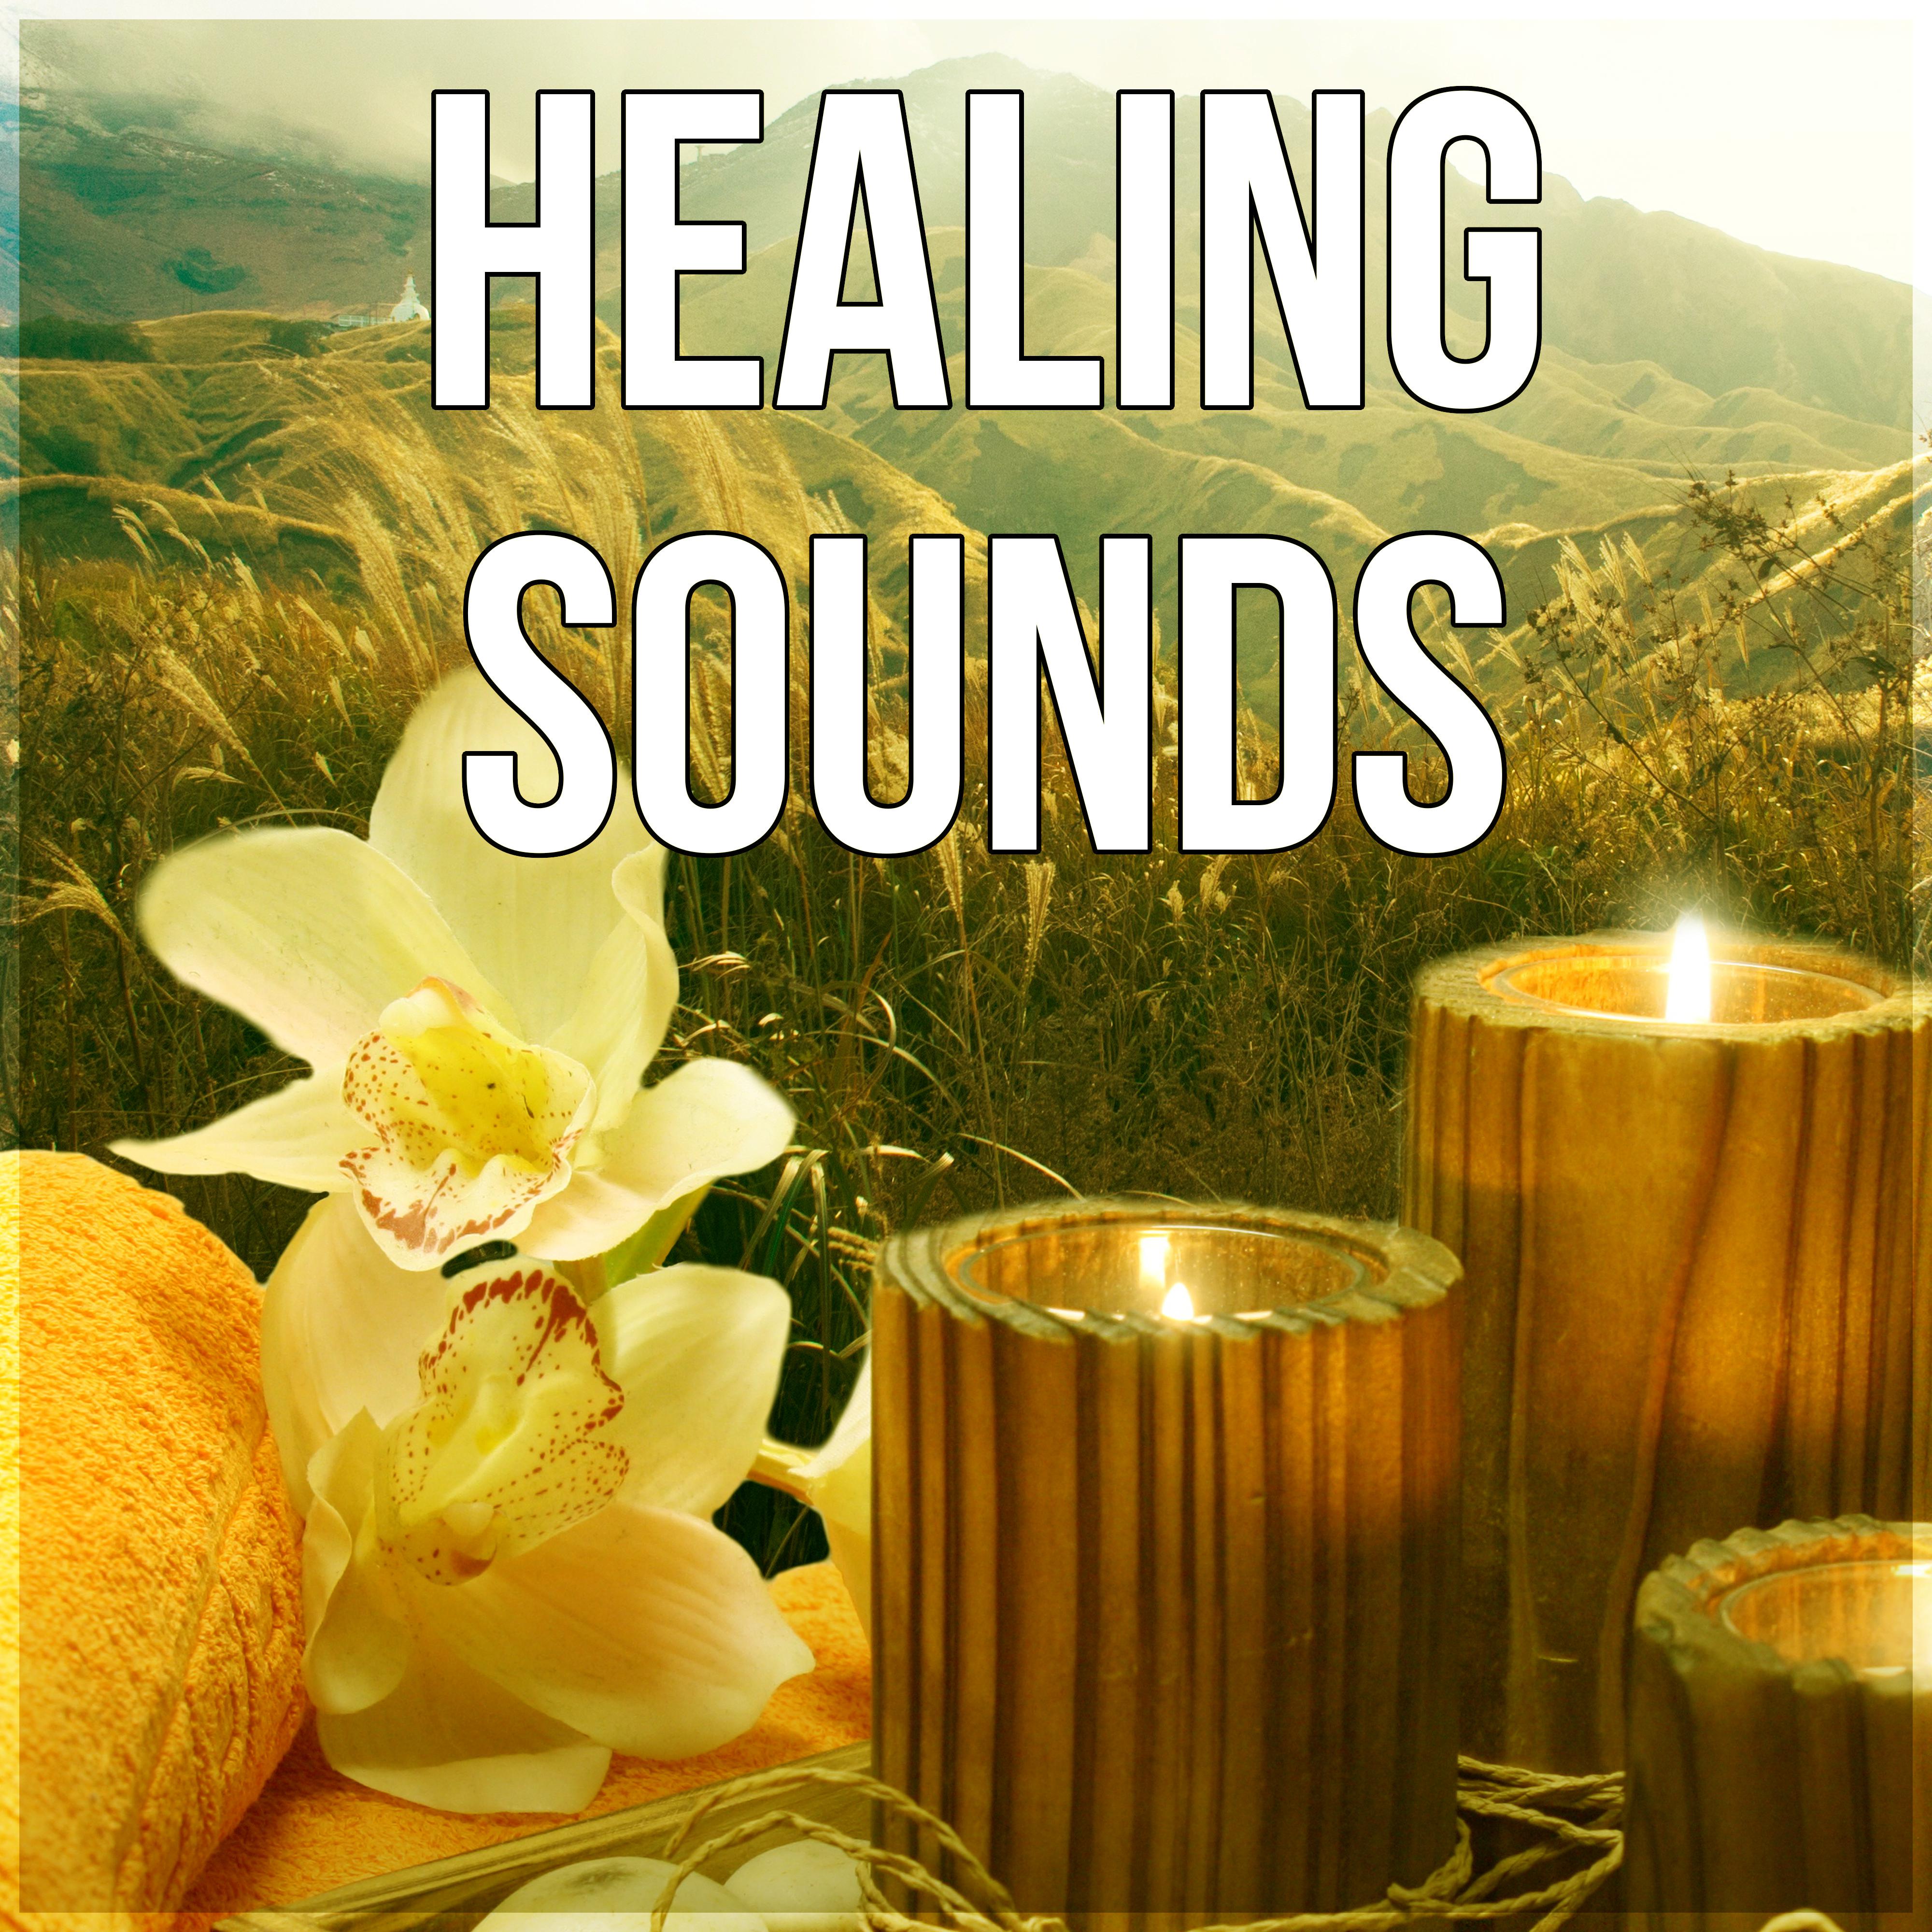 Healing Sounds  Music for Spa, Music Background, Massage Therapy, Waves, Calm Music, New Age